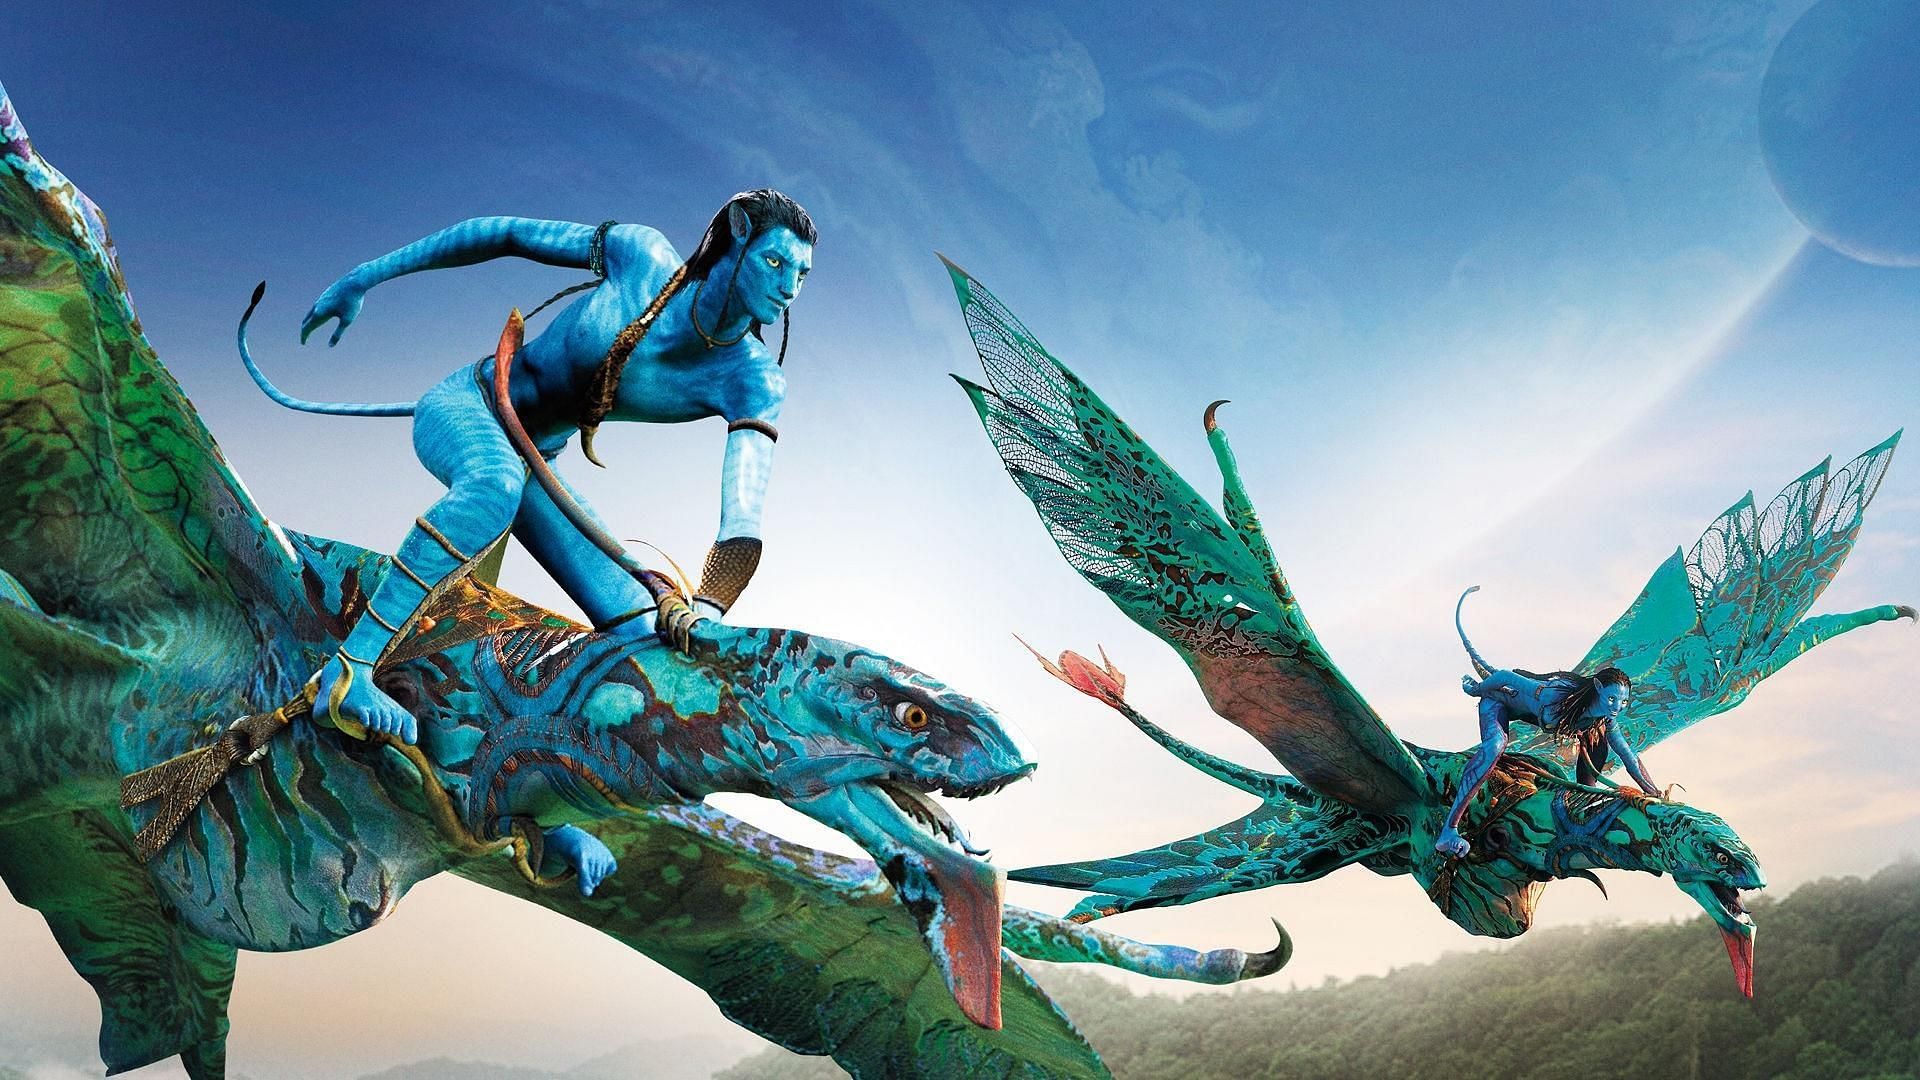 Avatar 2: Release date and time, trailer, cast details, plot, and more